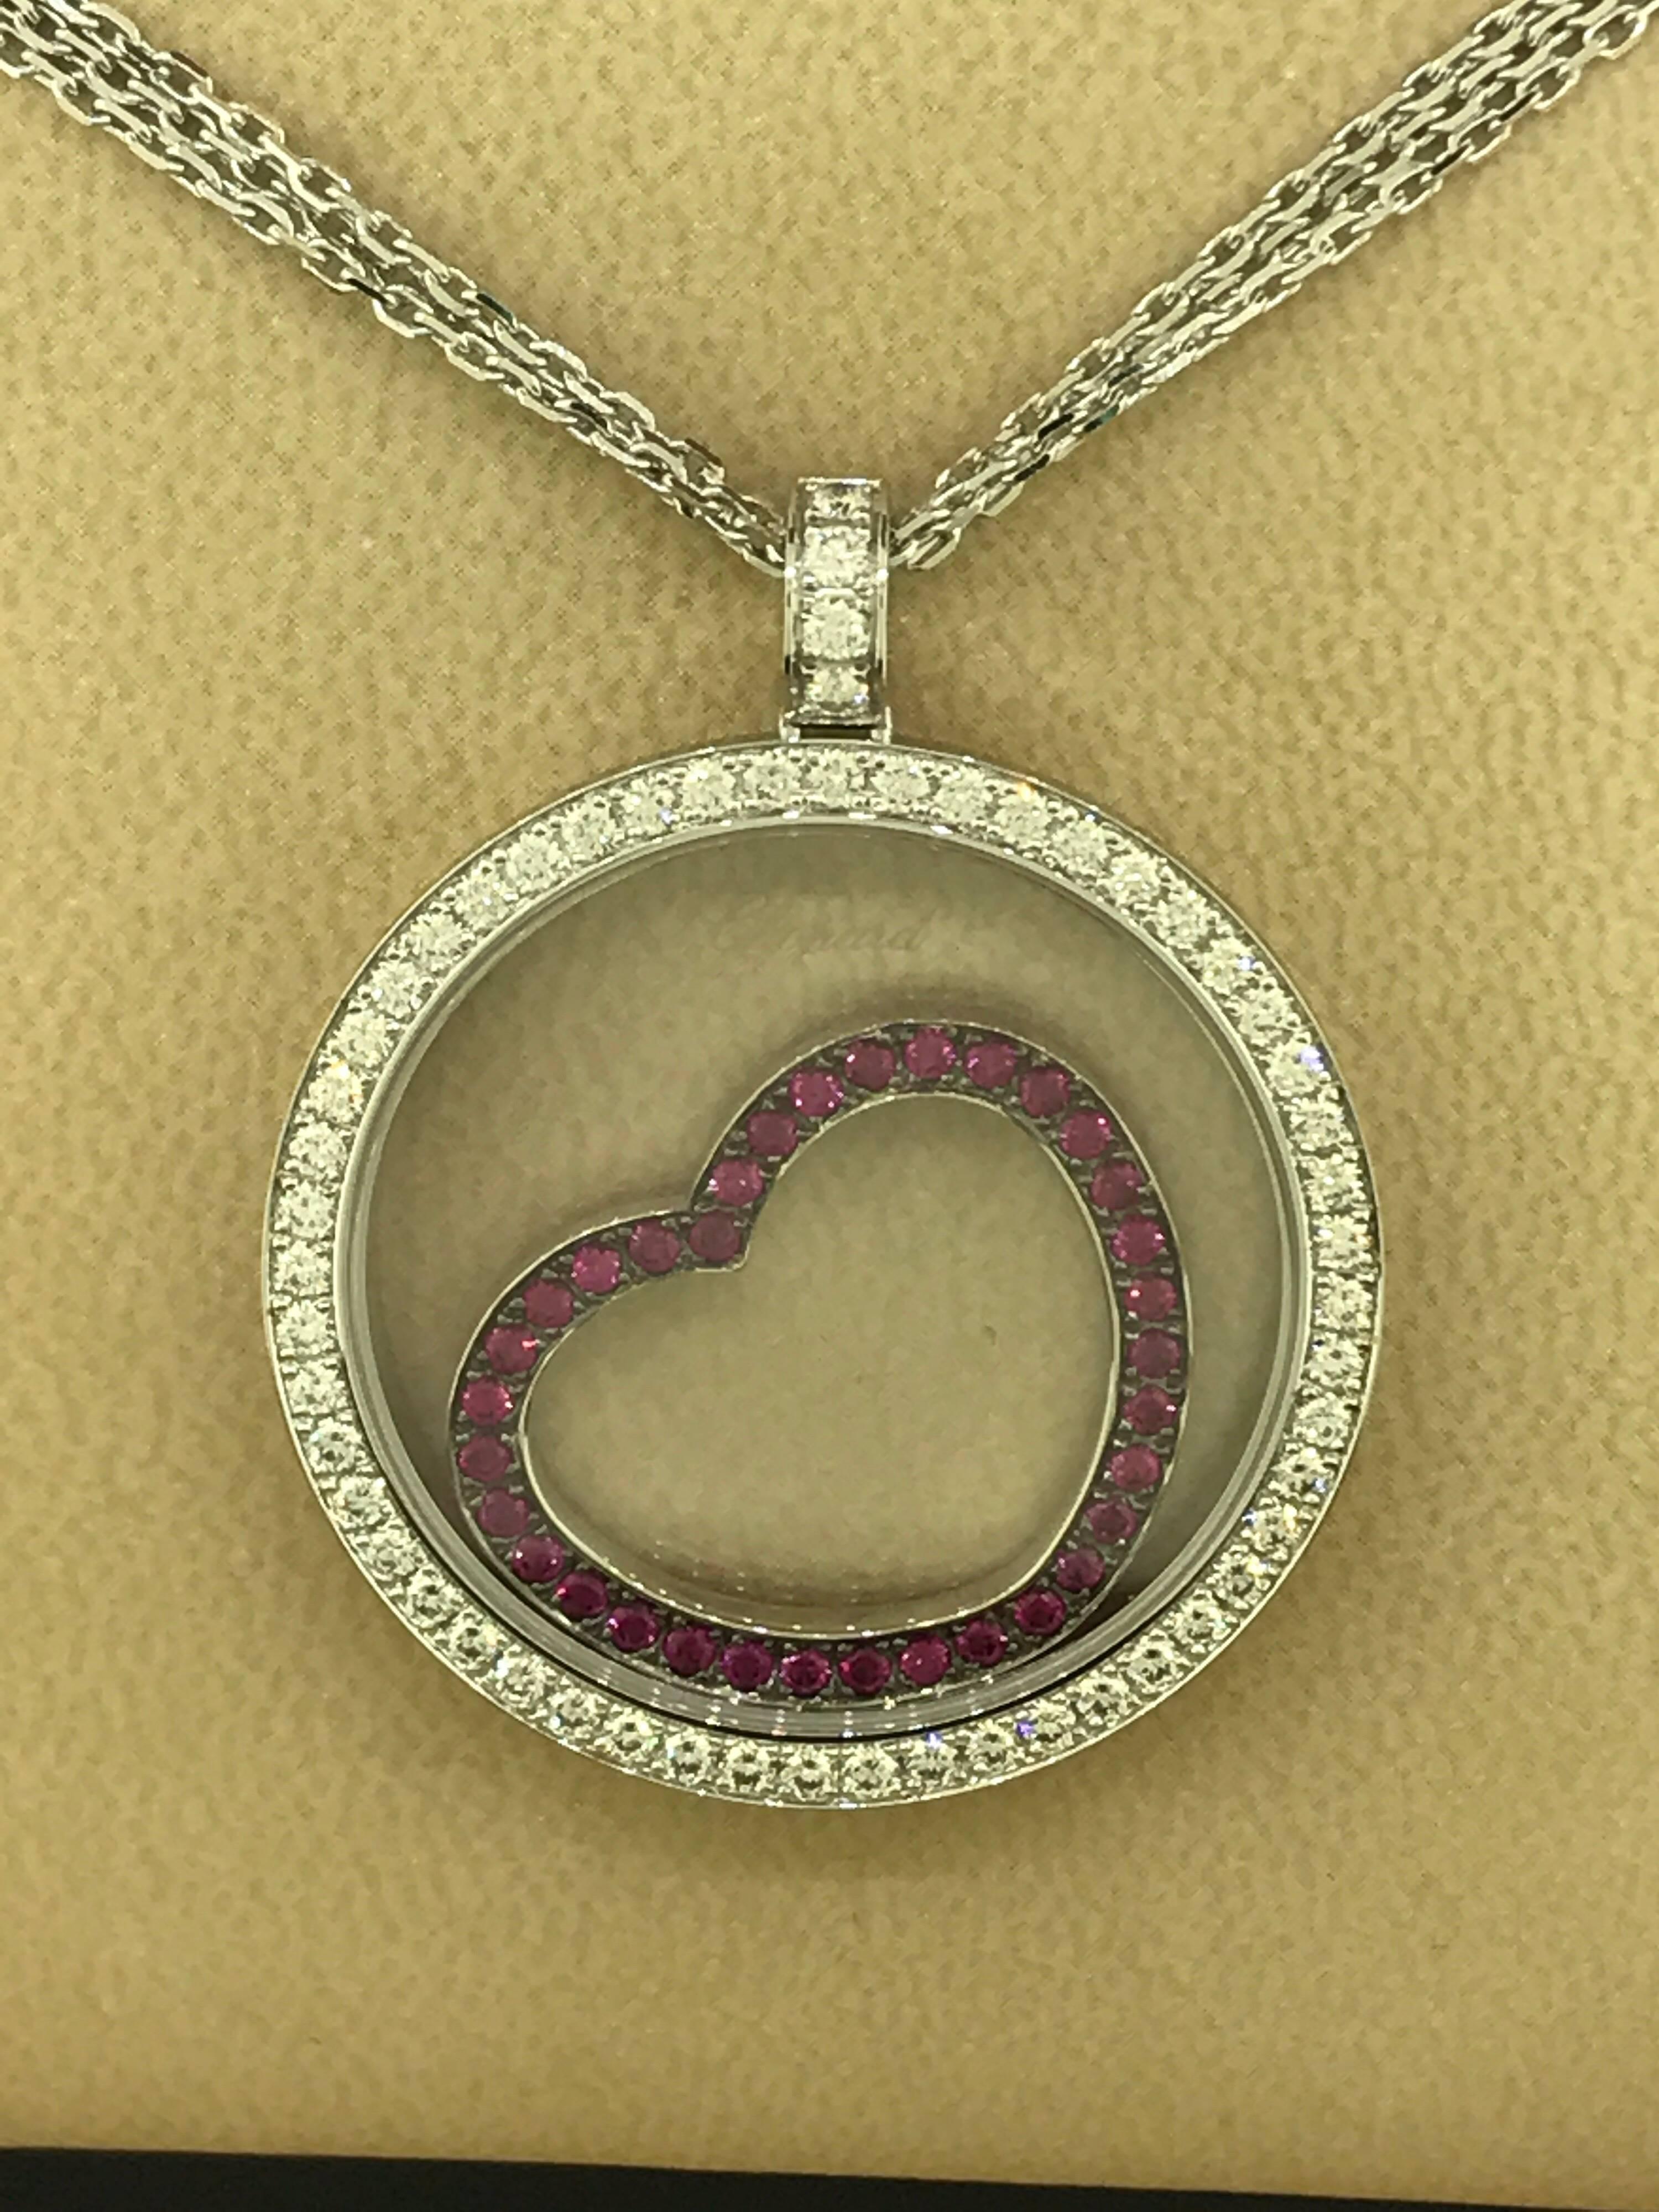 Chopard Happy Diamonds White Gold Diamond and Rubies Heart Pendant Necklace New 2